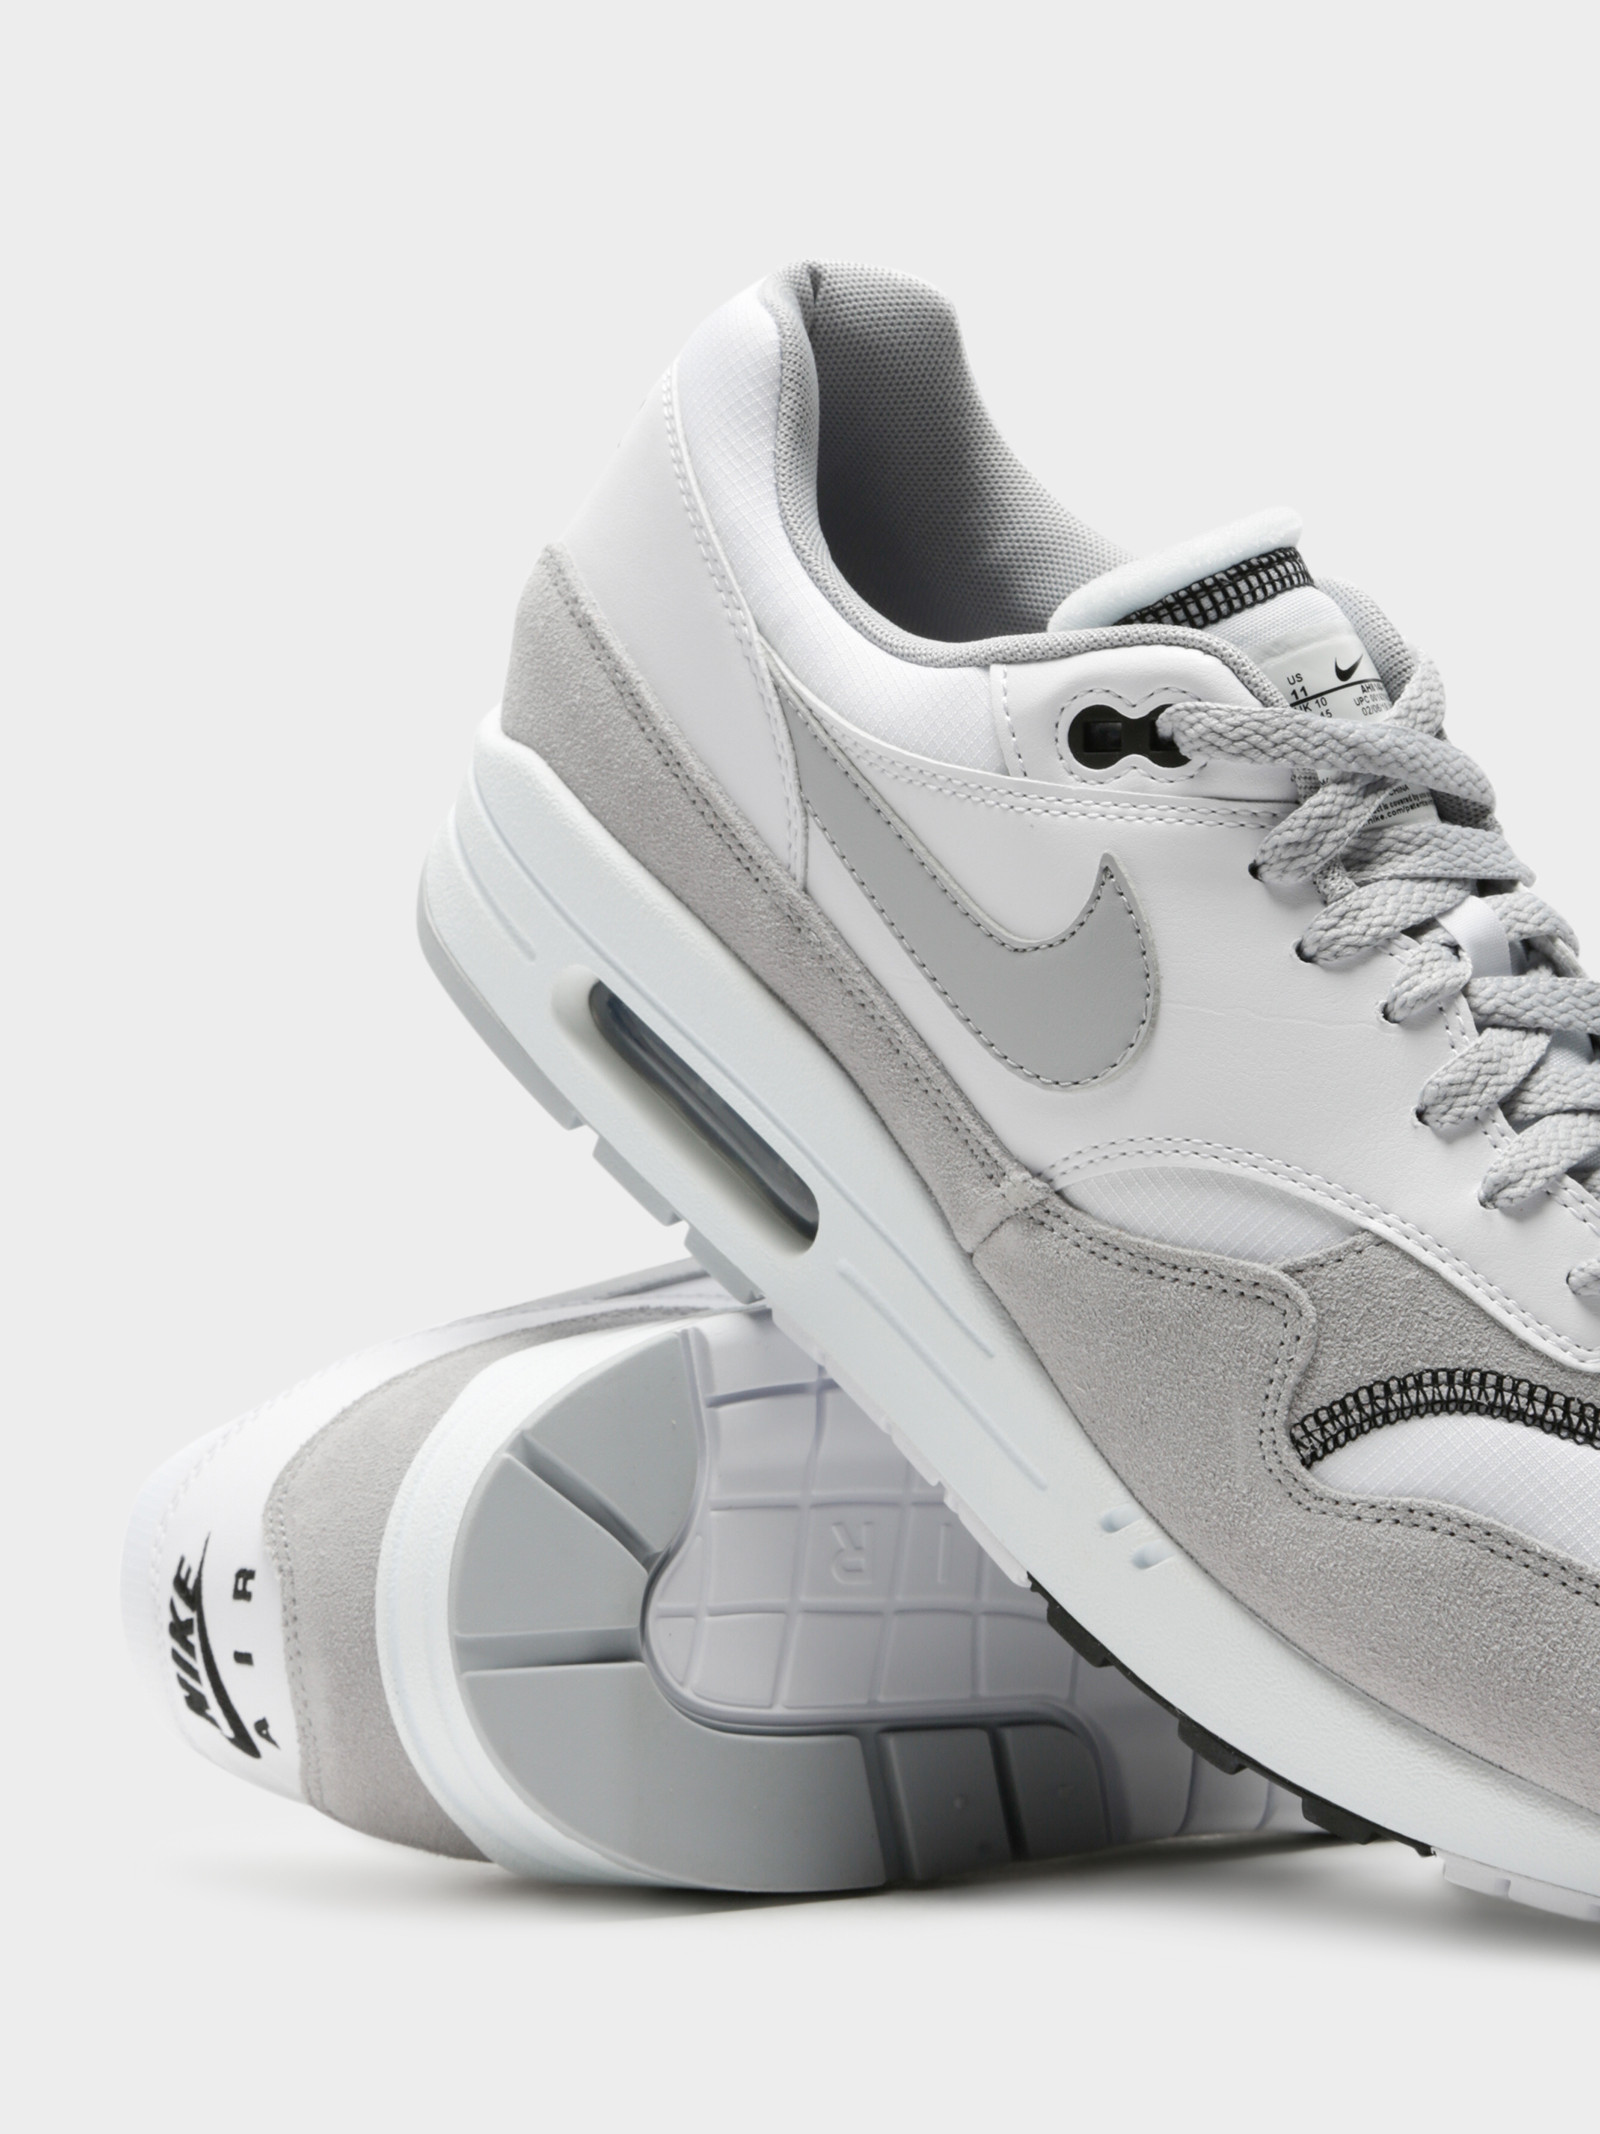 inside out am1